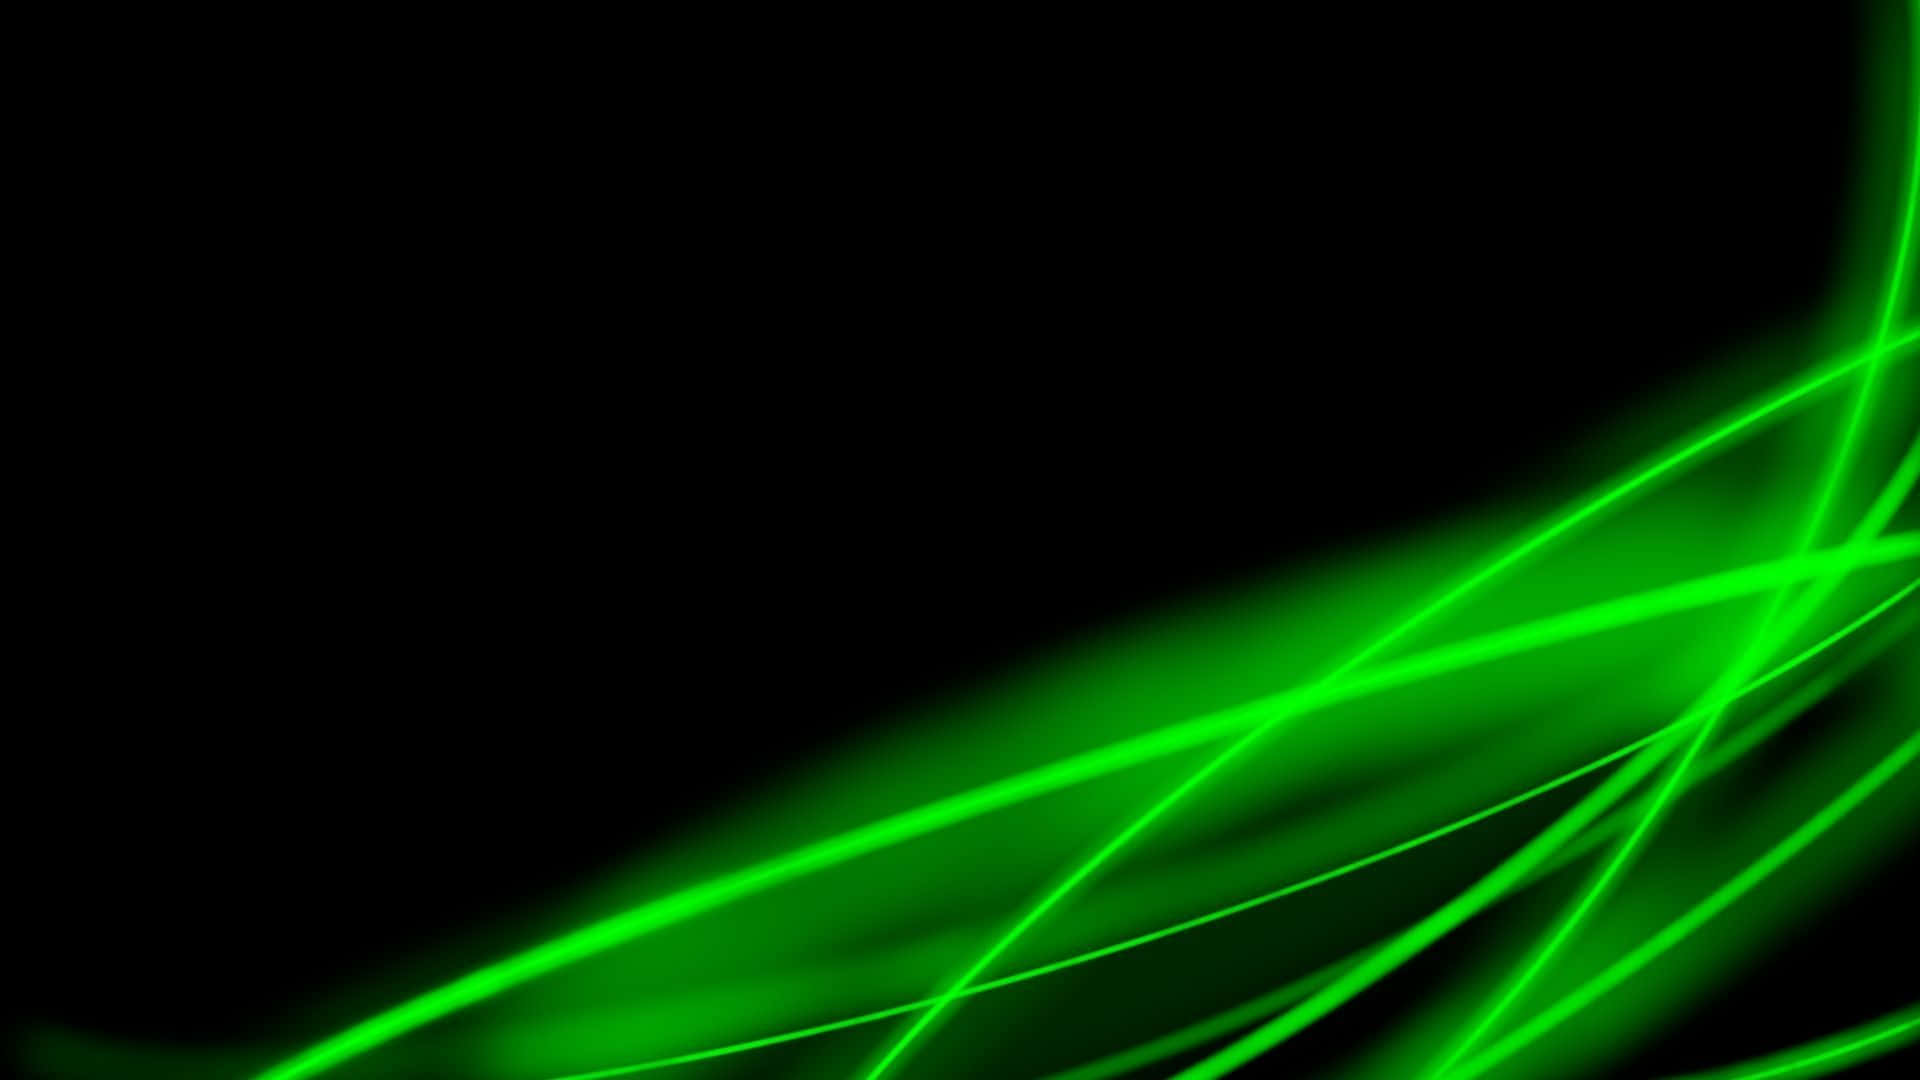 100+] Green And Black Background s 